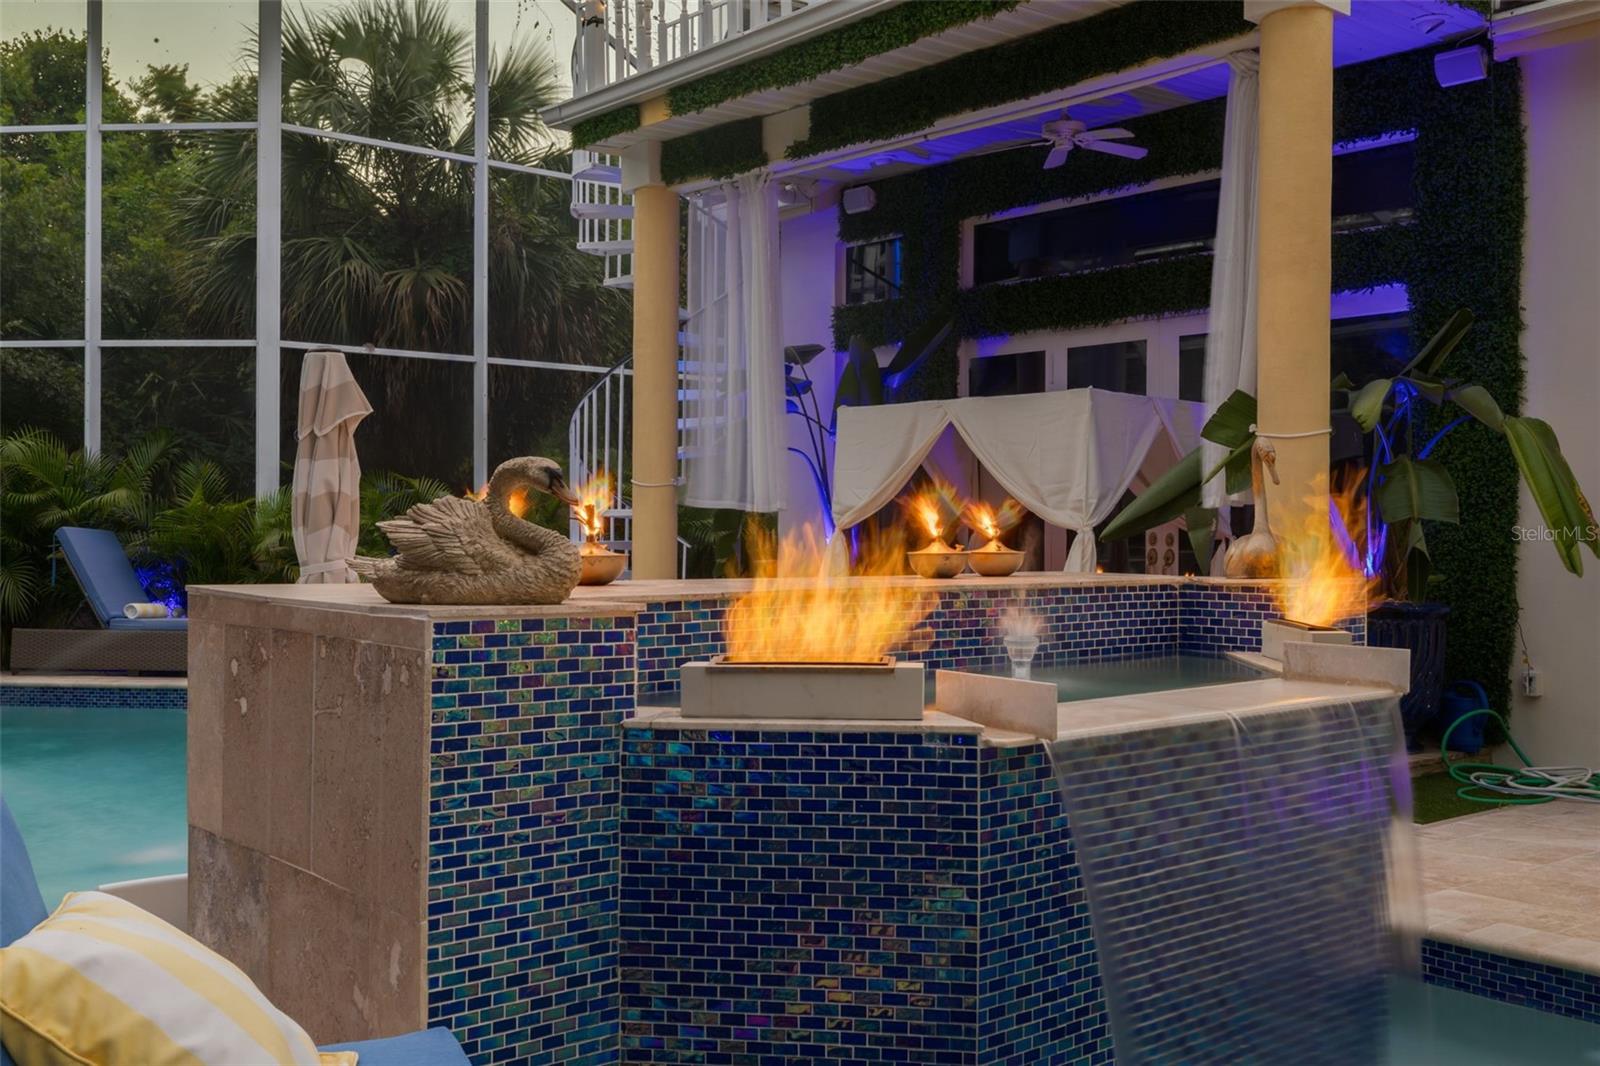 Firepit and Waterfalls